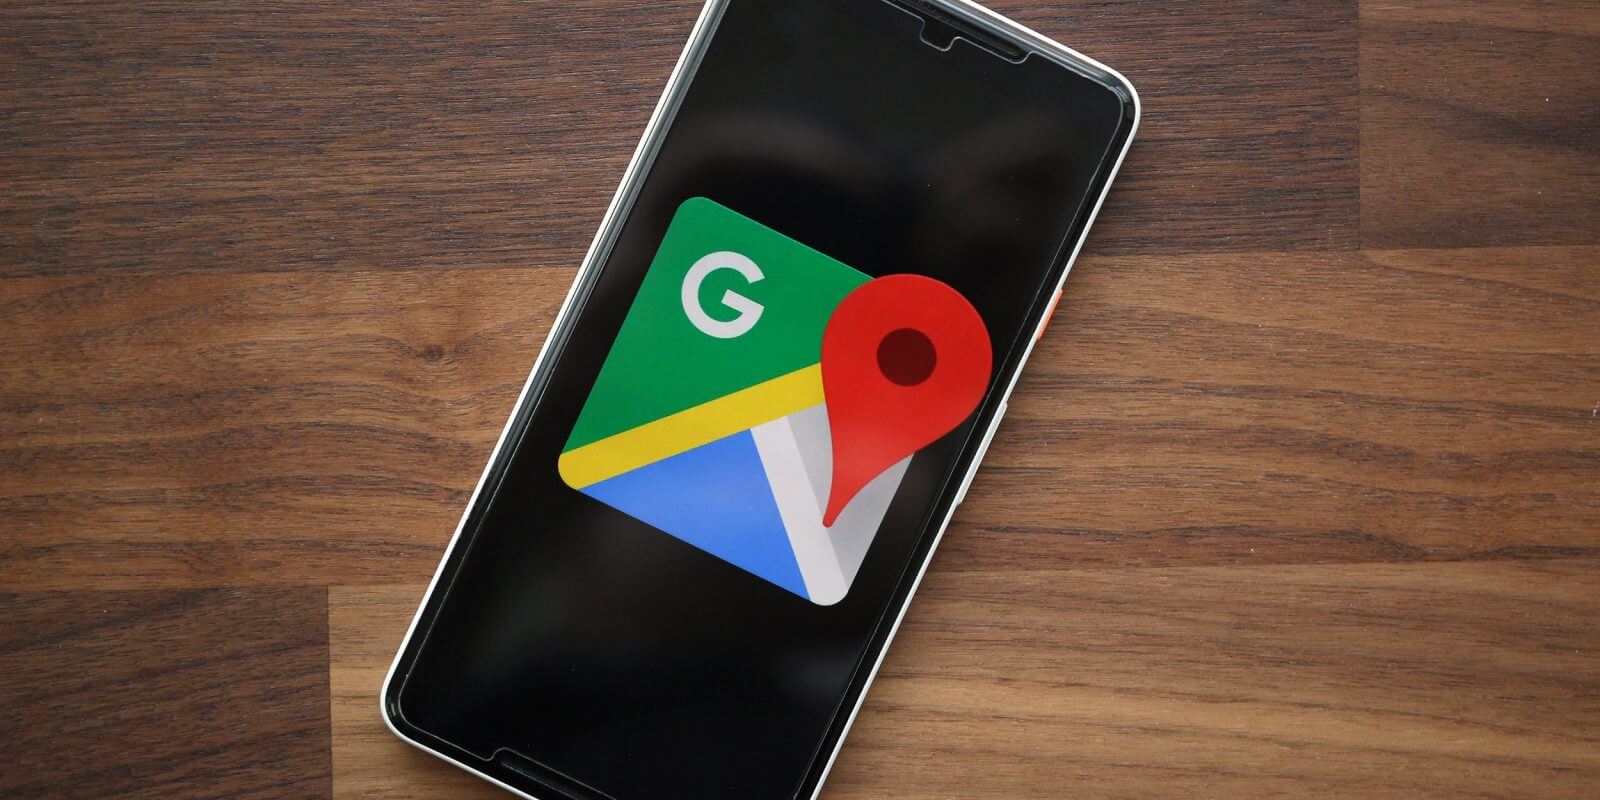 Google Maps on Android gets Street View integration for better navigating